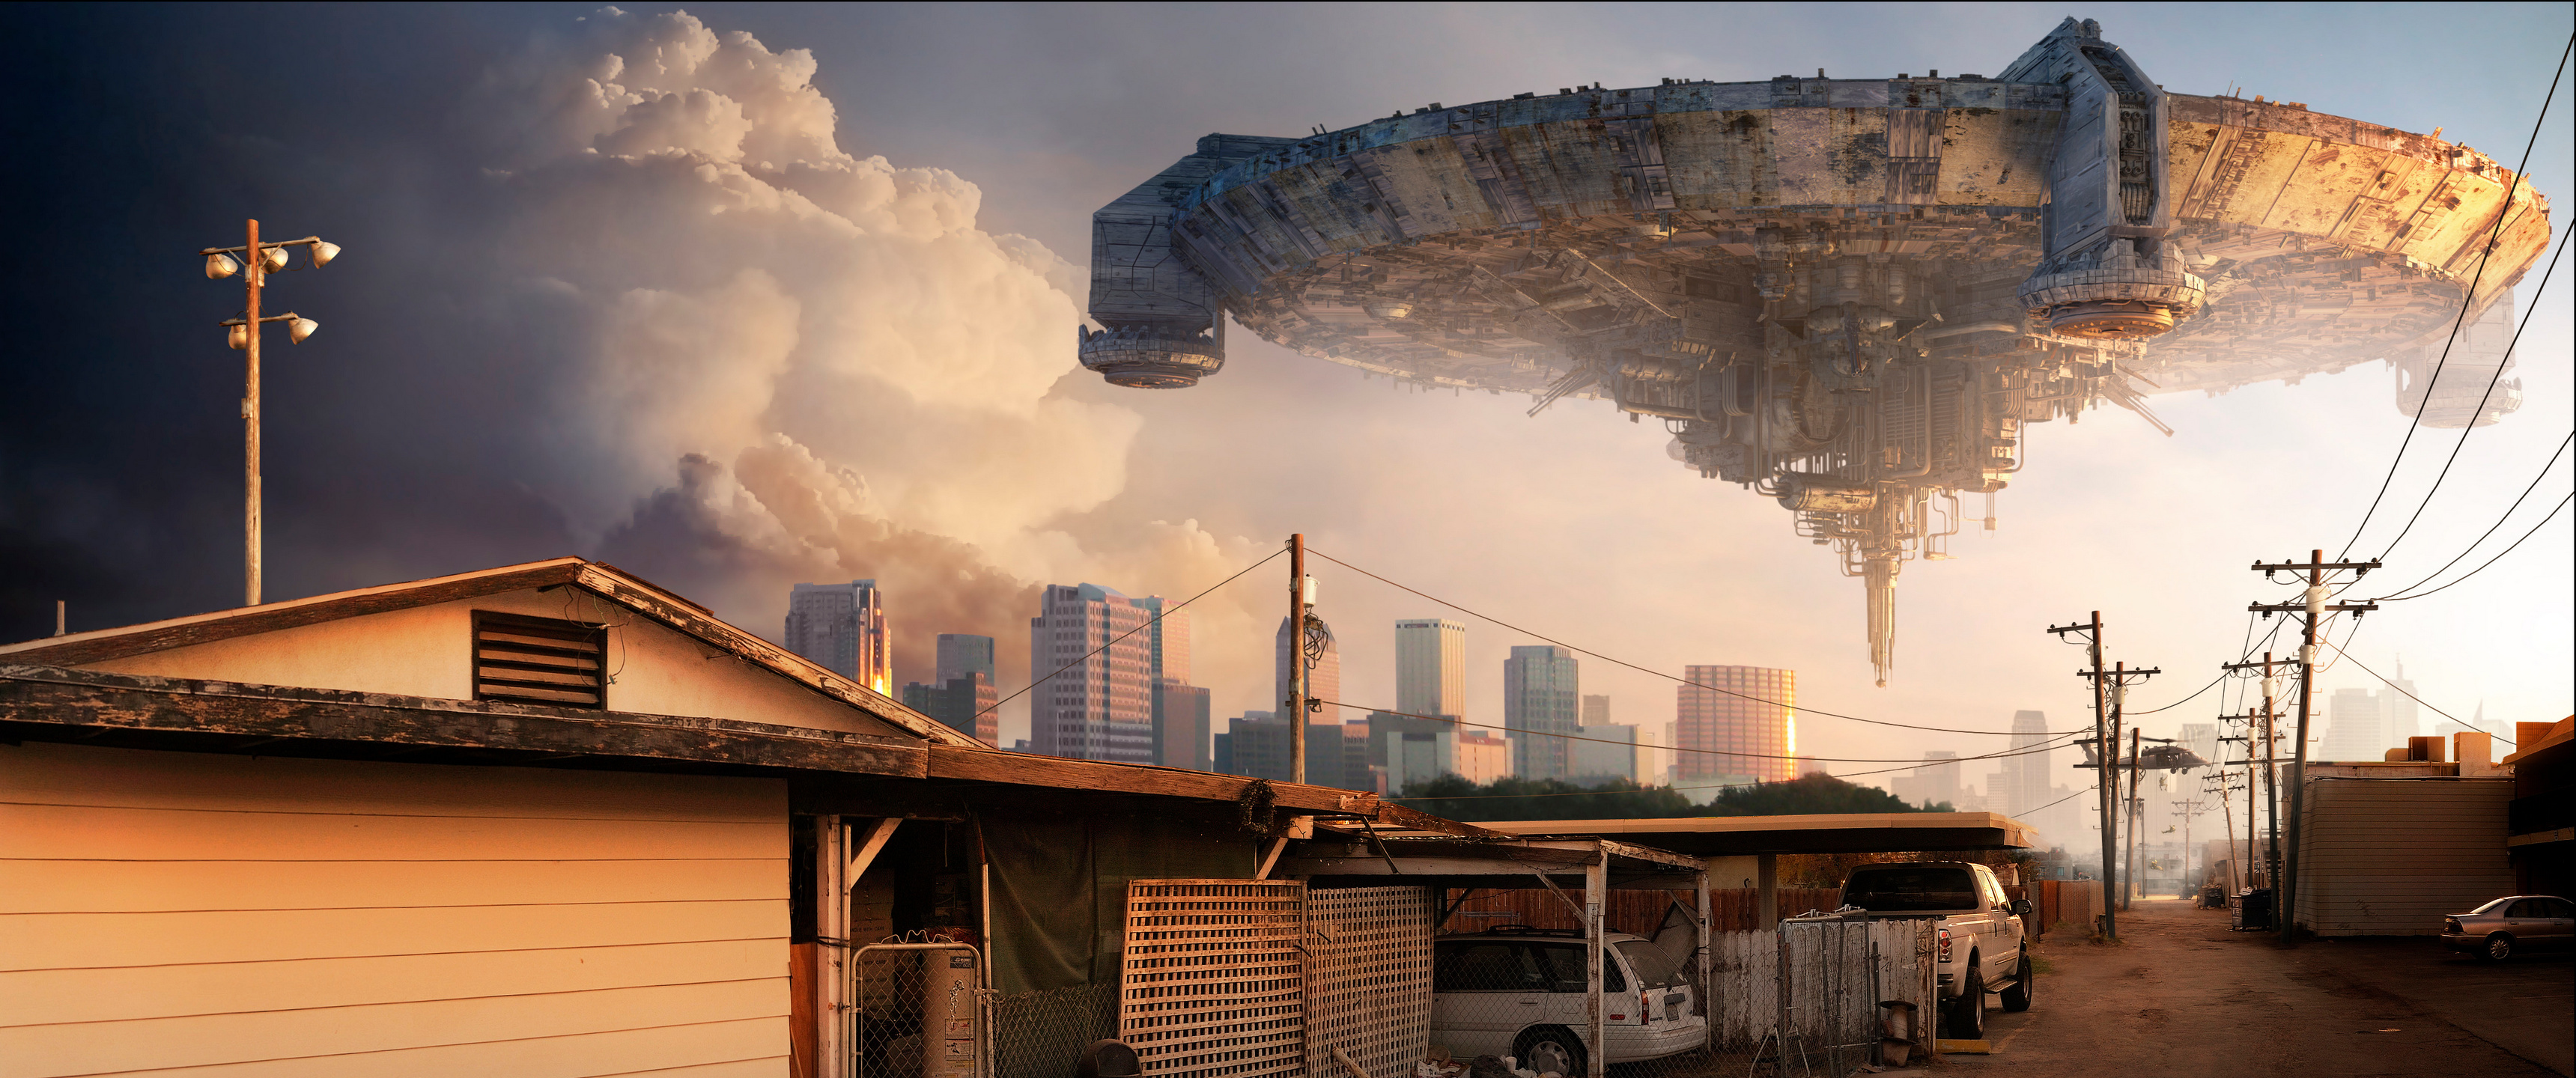 District 9: A co-production of New Zealand, the United States, and South Africa. 3440x1440 Dual Screen Background.